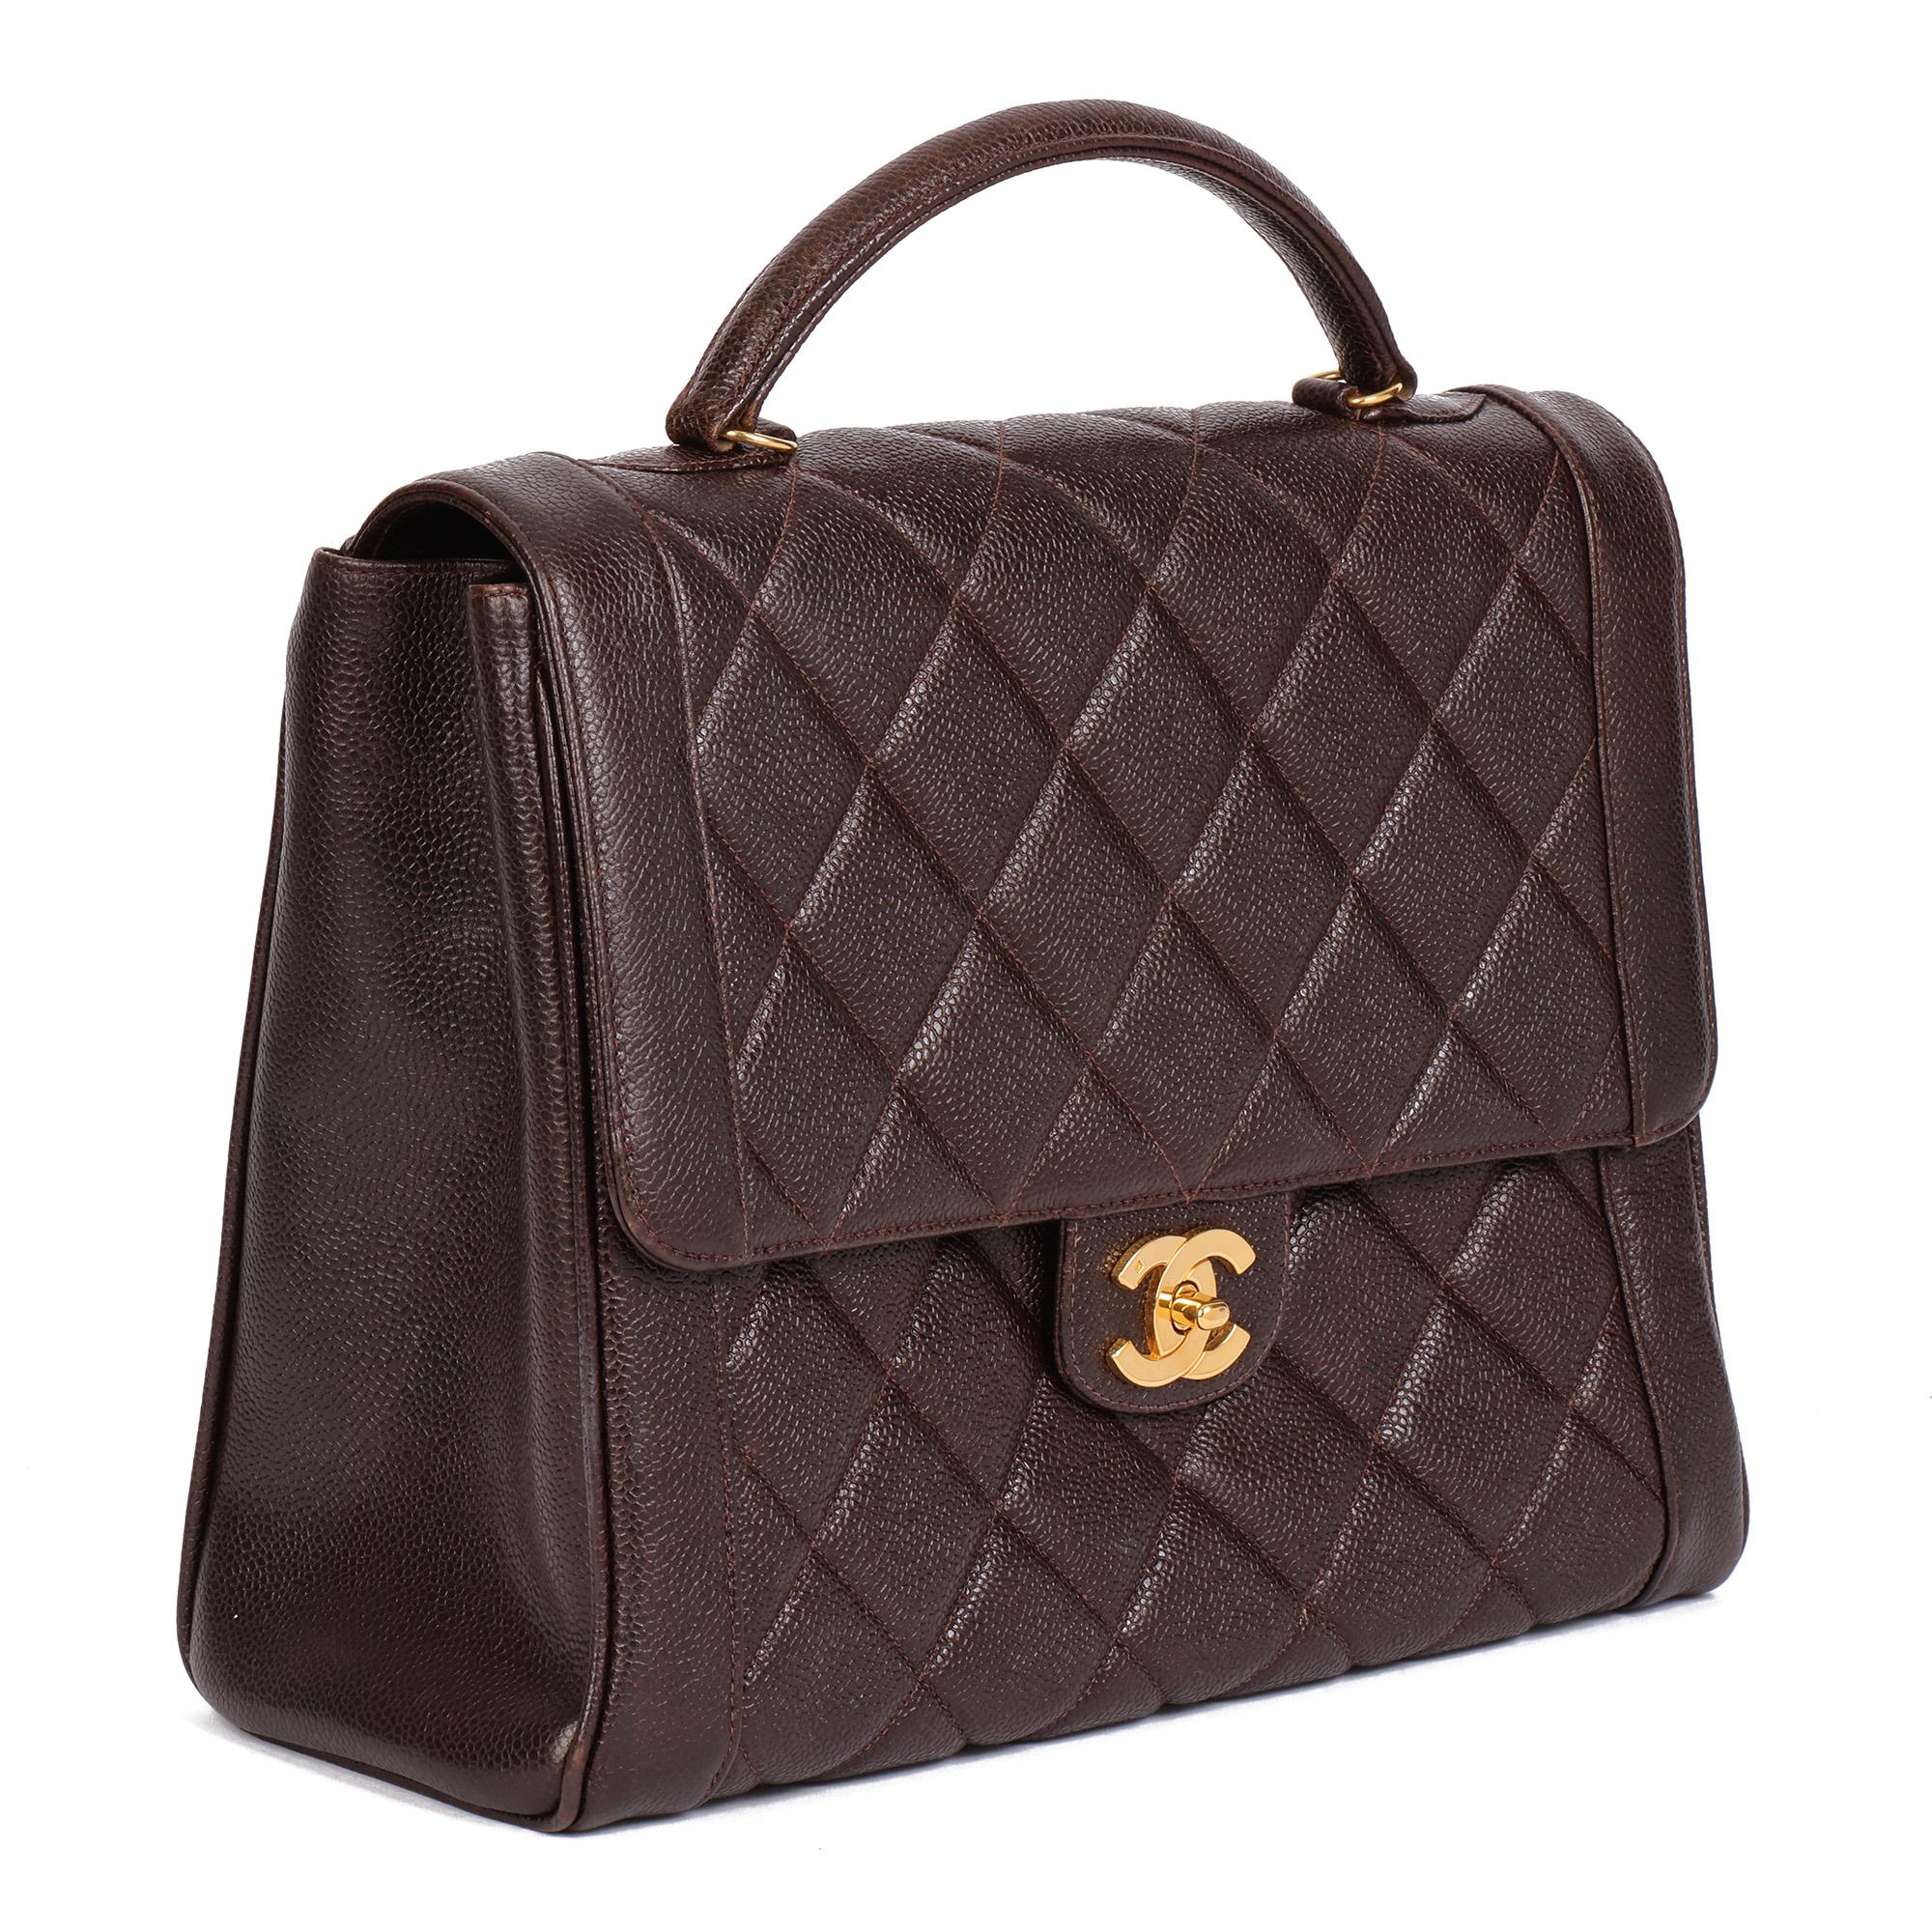 CHANEL
Chocolate Brown Quilted Caviar Leather Vintage Classic Kelly

Serial Number: 3679107
Age (Circa): 1995
Accompanied By: Chanel Dust Bag, Authenticity Card
Authenticity Details: Authenticity Card, Serial Sticker (Made in France)
Gender: